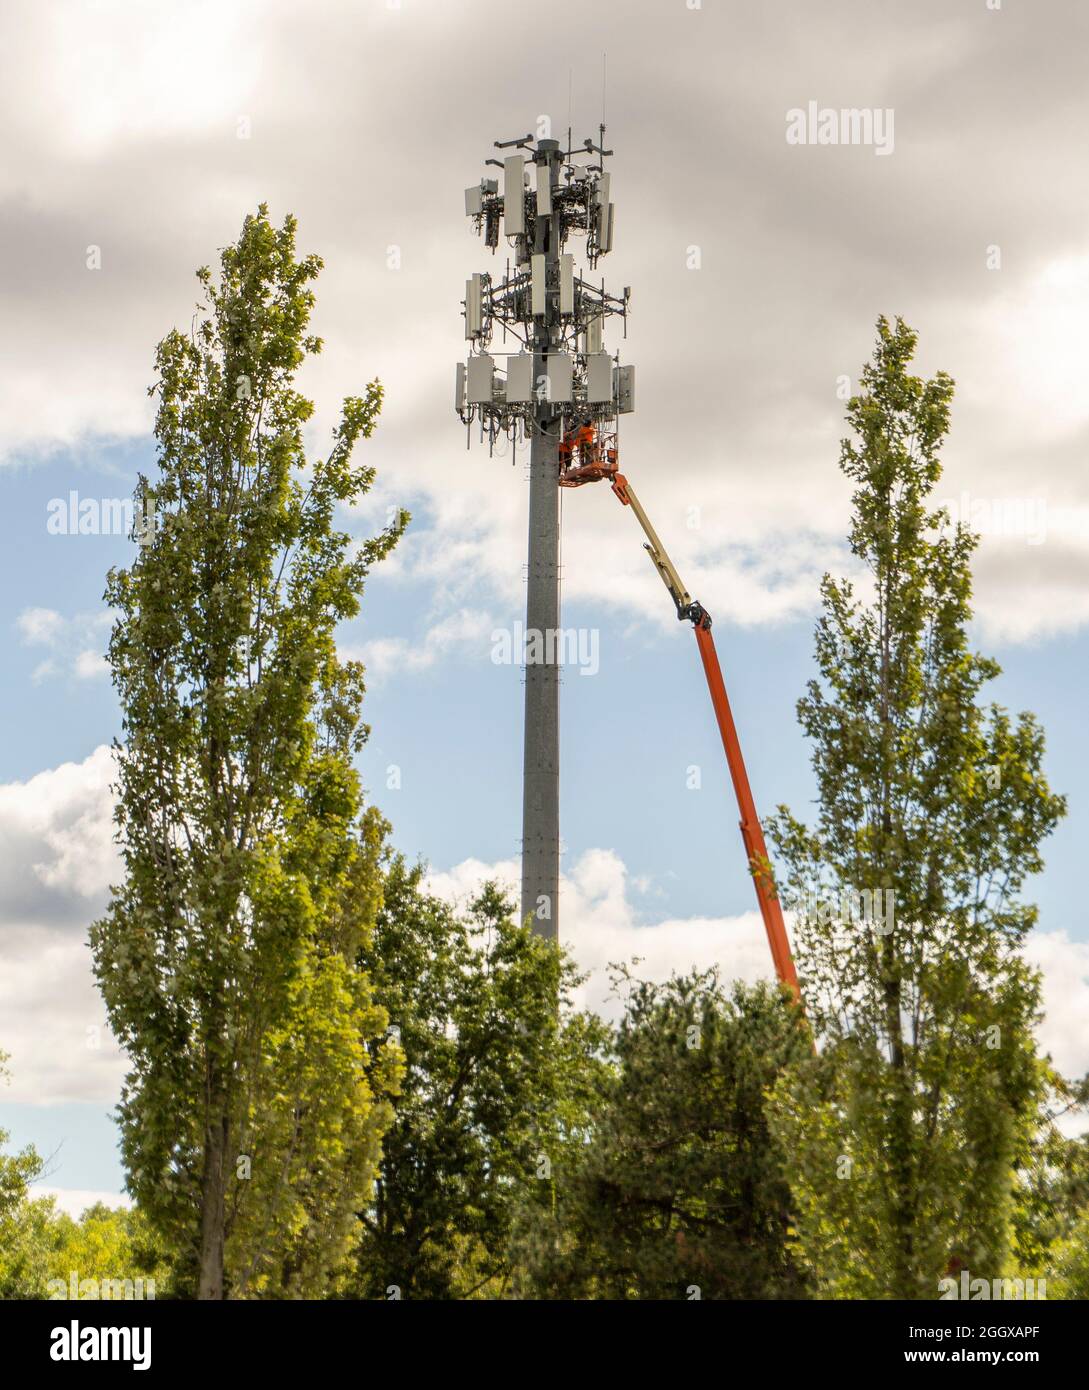 A cell tower being repaired Stock Photo